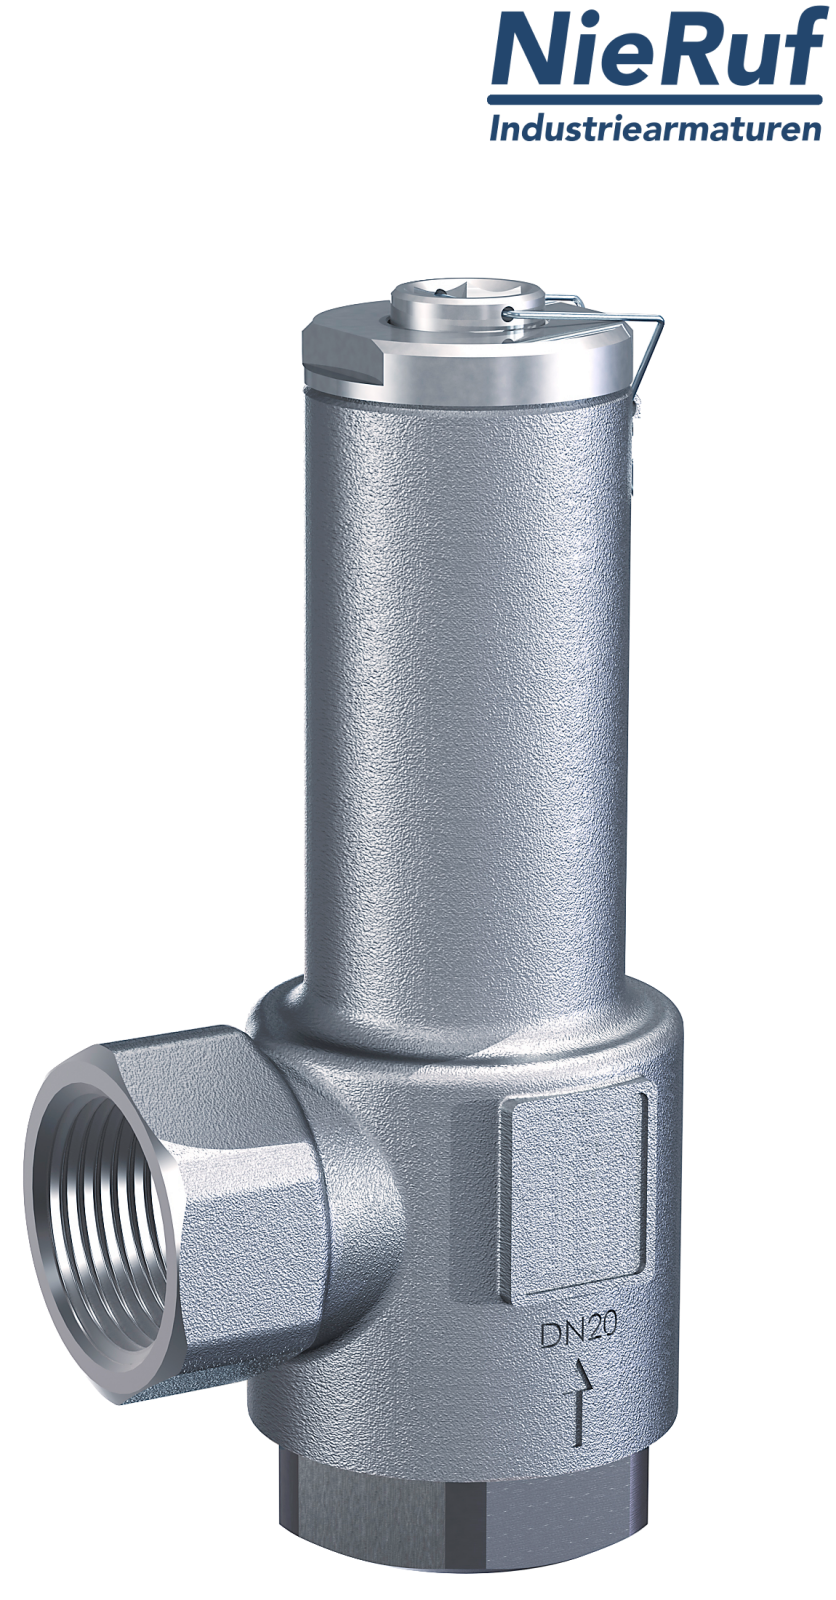 angle-type overflow valve 3/8" inch fm UV04 stainless steel AISI 316L 12 - 20 bar